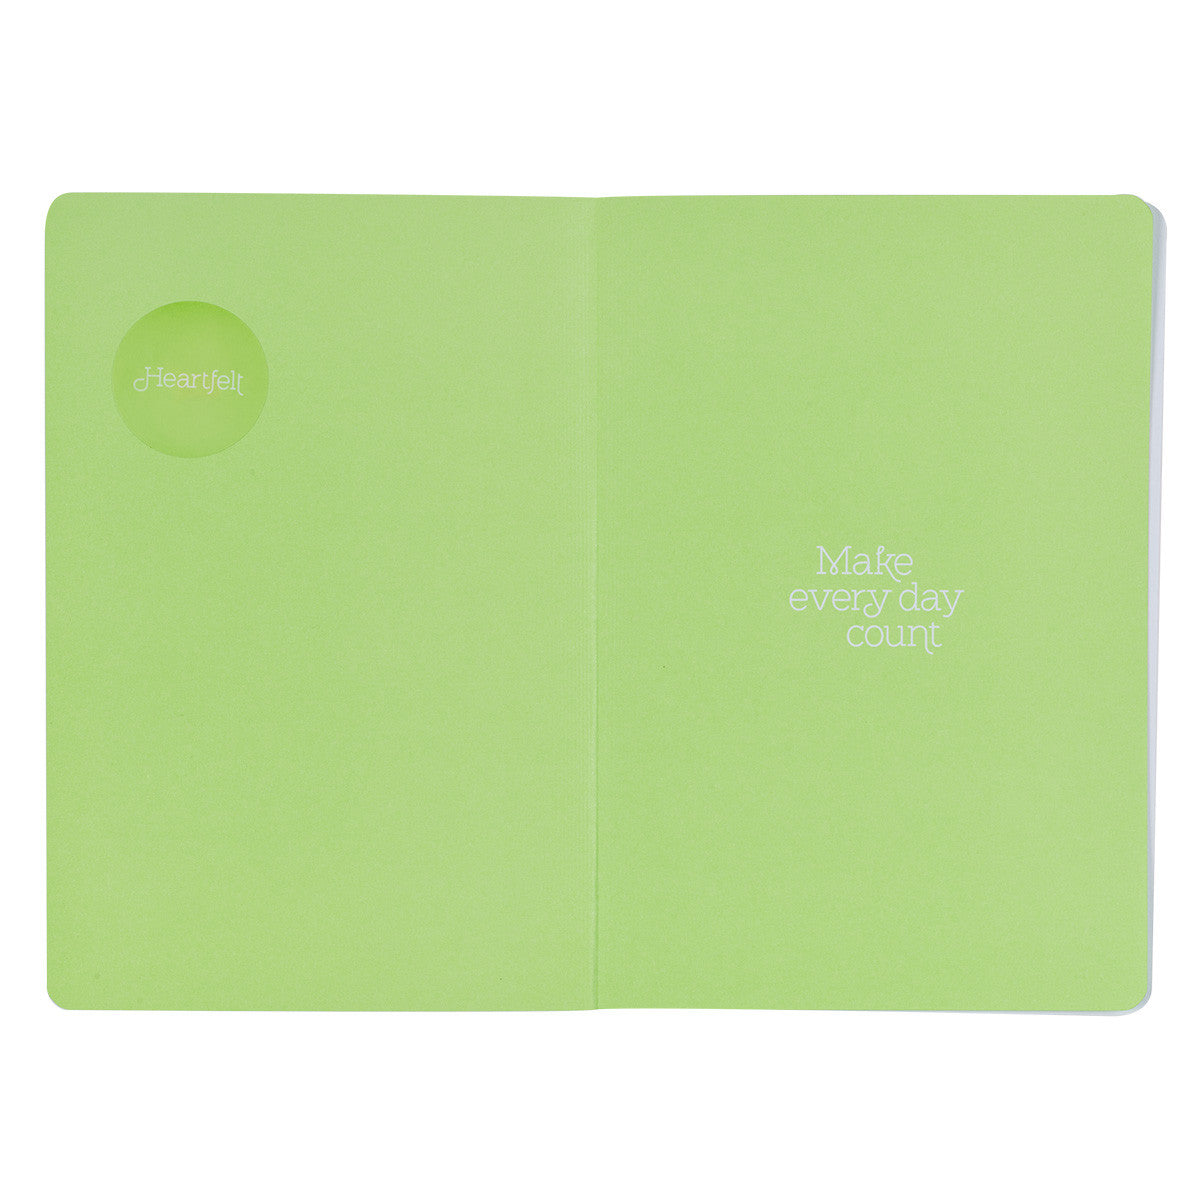 Courage Dear Heart Citrus Leaves Flexcover Journal with Elastic Closure - The Christian Gift Company